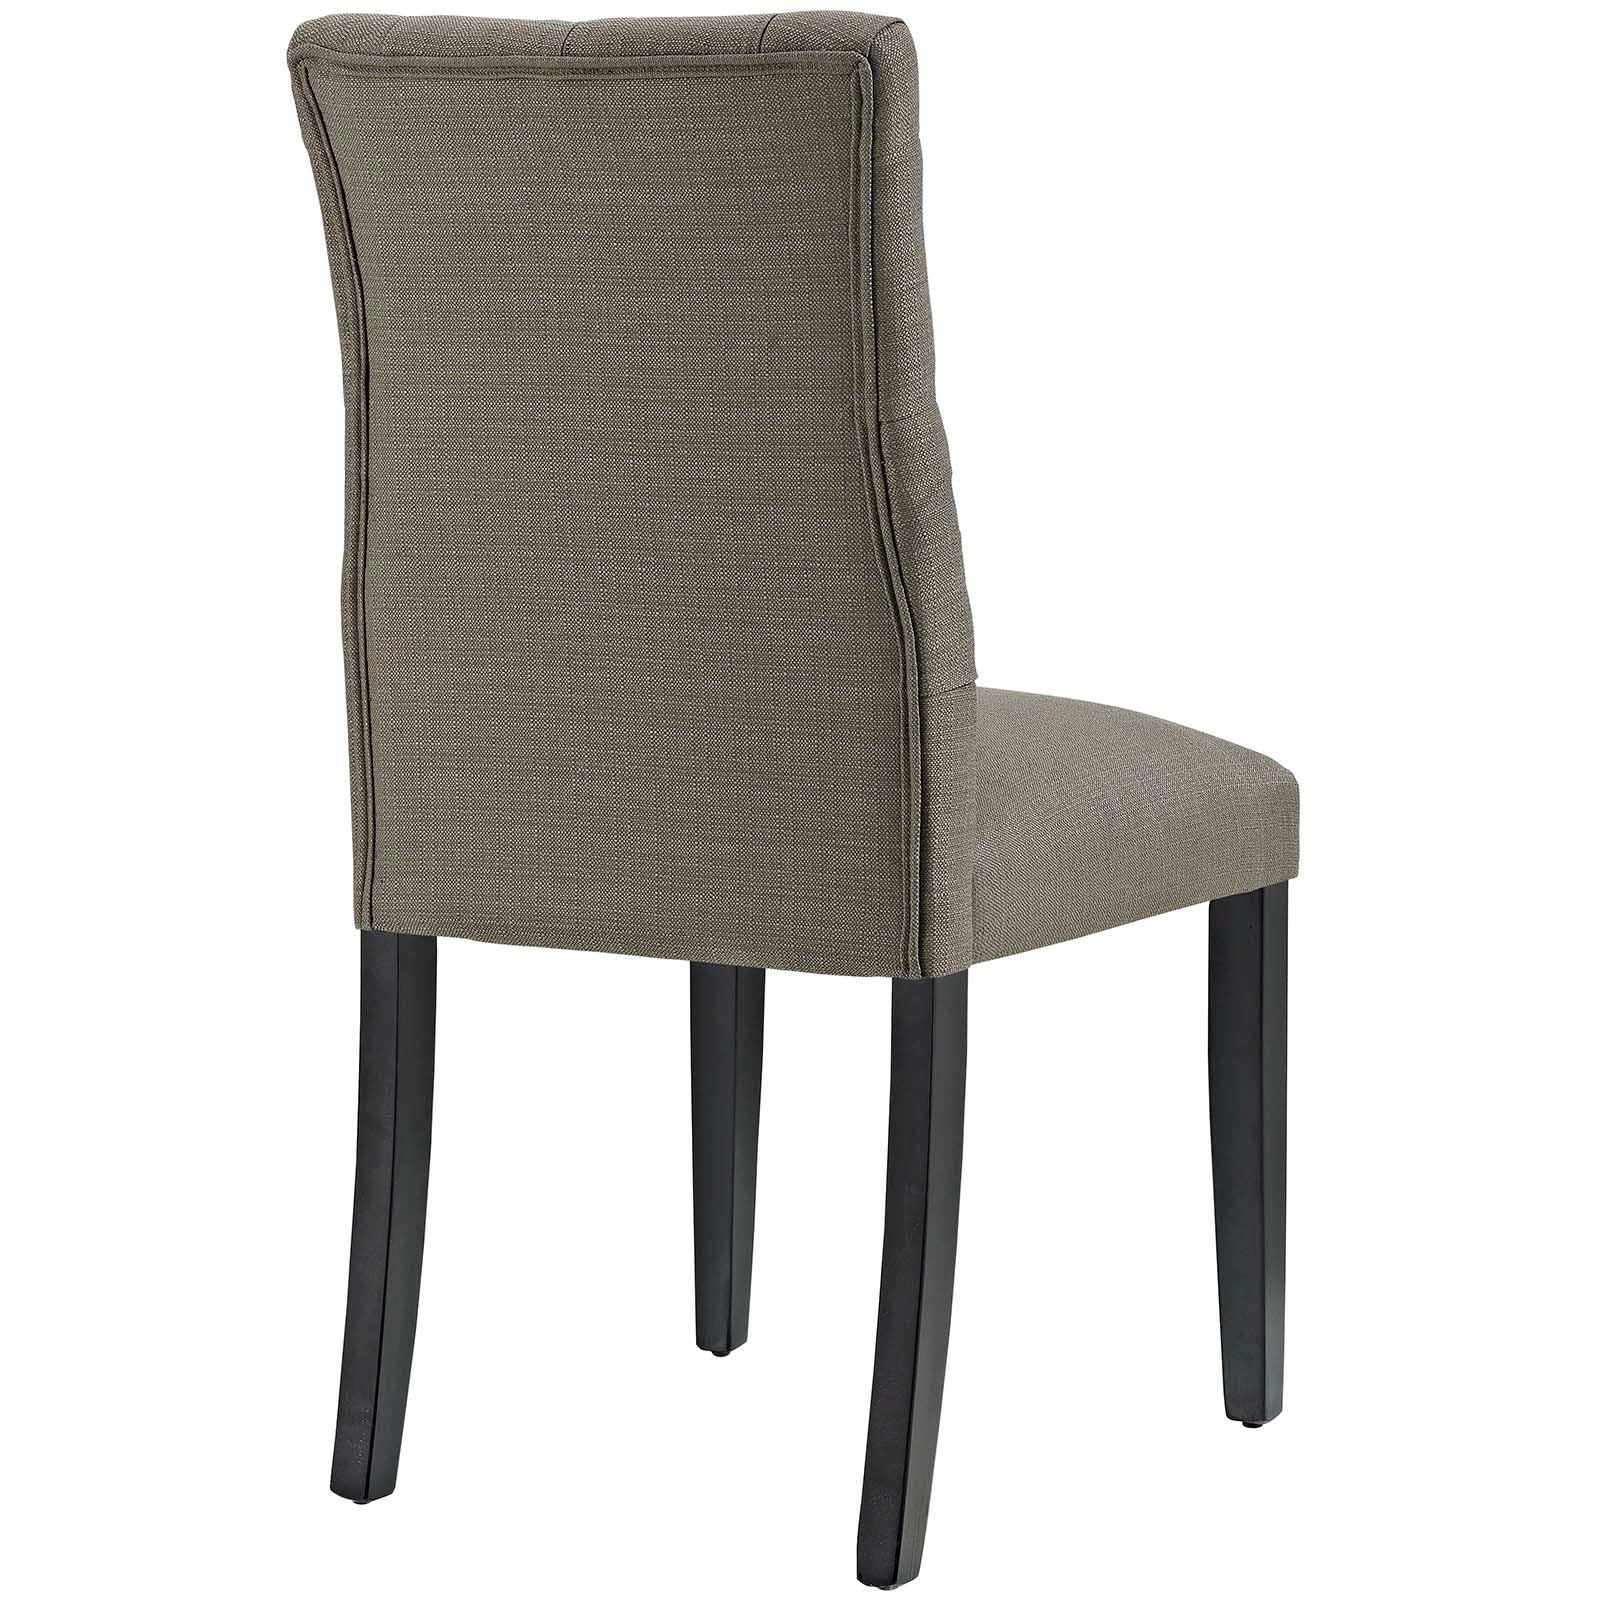 Modway Dining Chairs - Duchess Fabric Dining Chair Granite